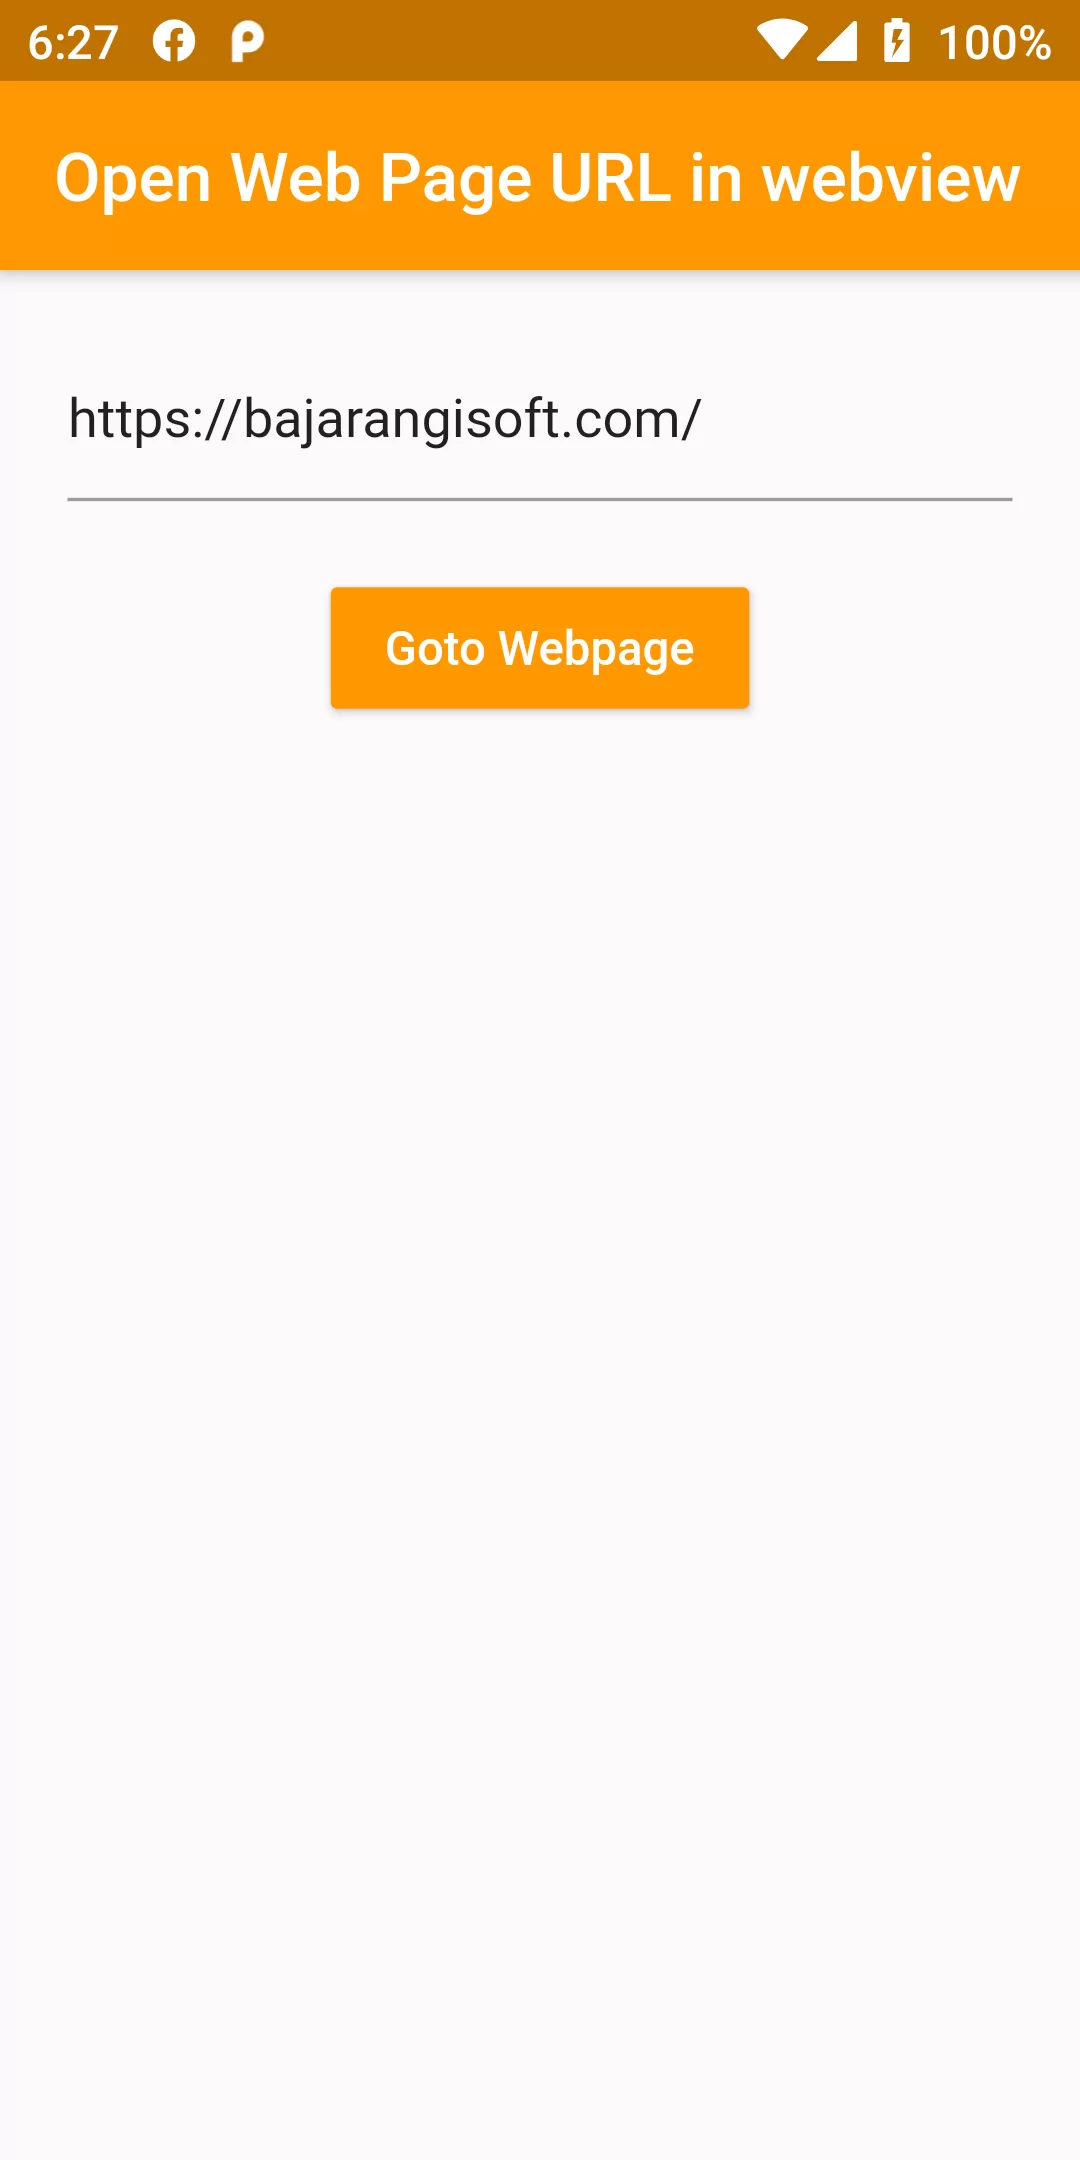 How To Open Web Page Url In Webview Using Flutter App